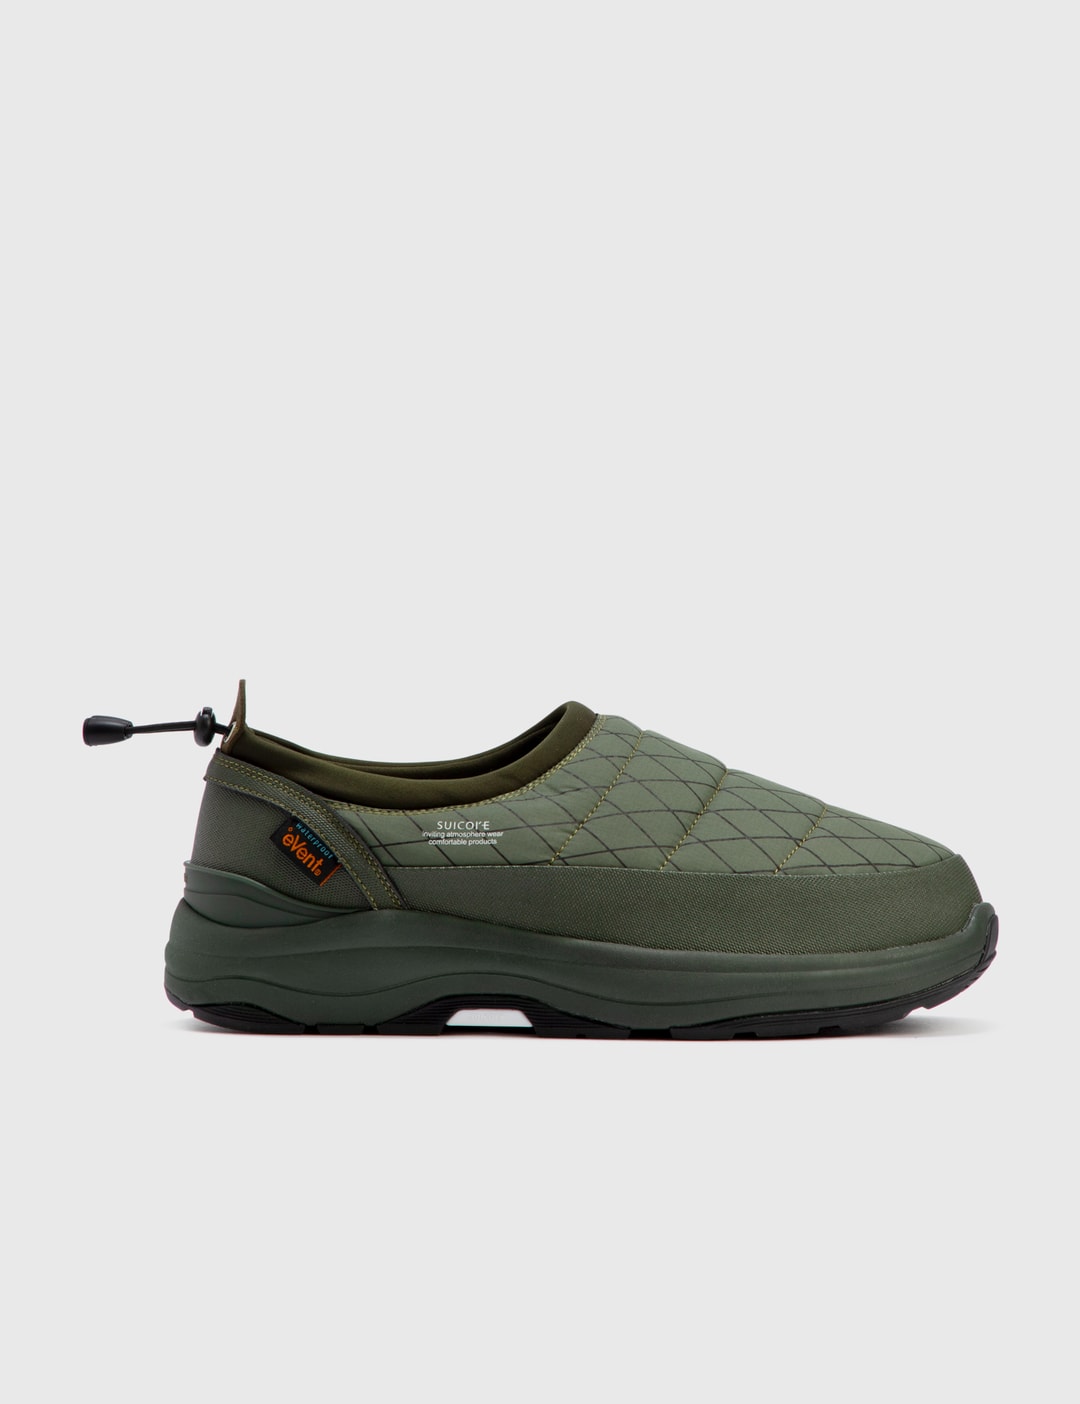 Suicoke - PEPPER-evab Insulated Sneaker | HBX - Globally Curated ...